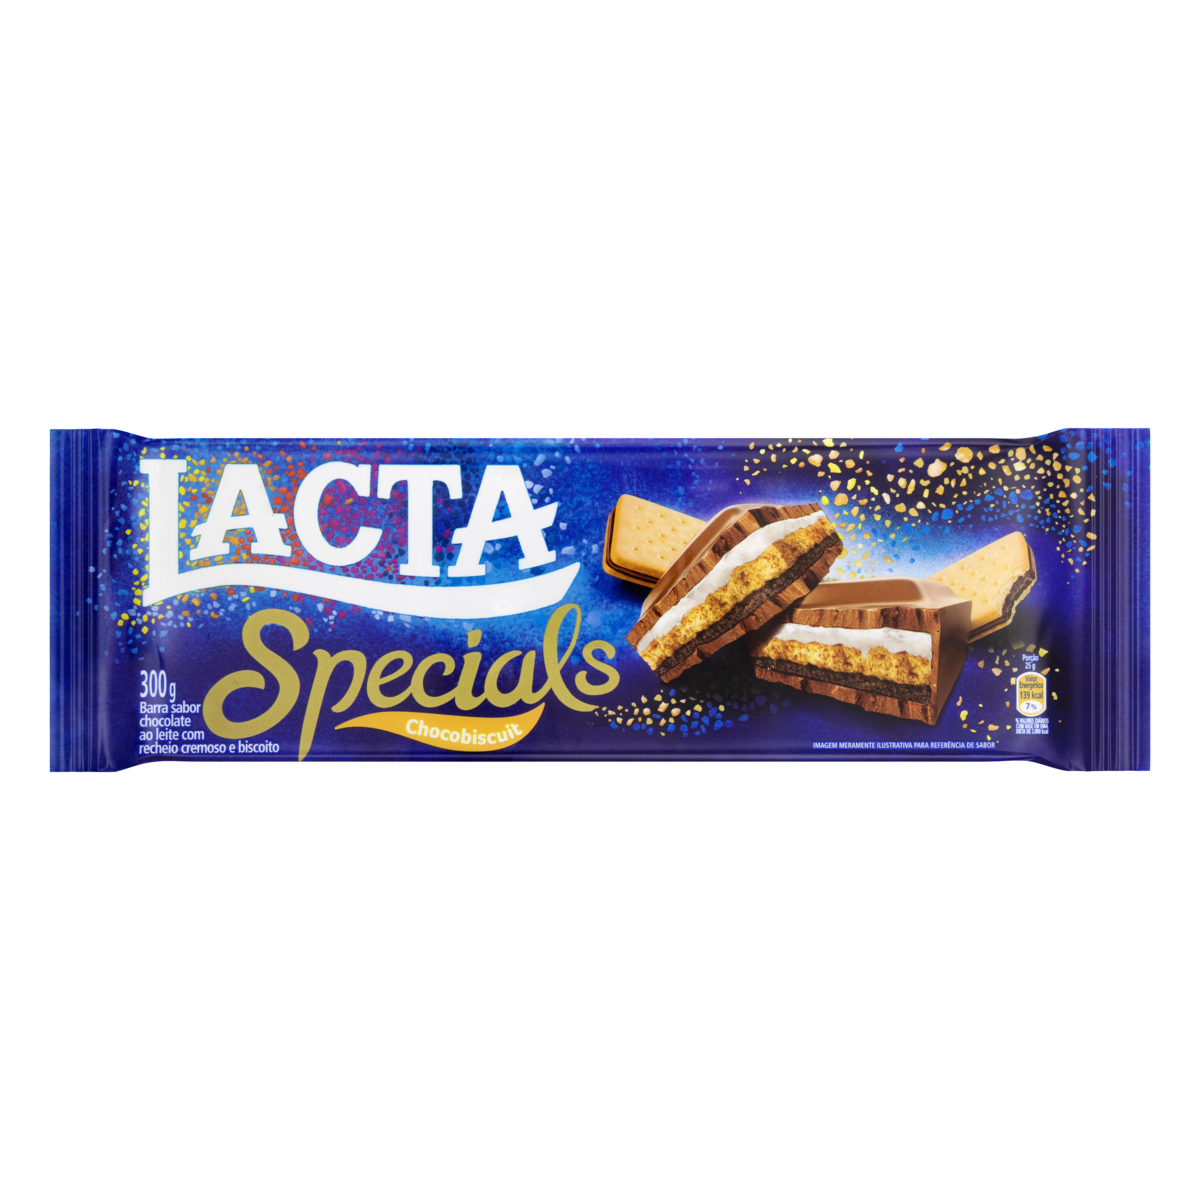 7622210845658 - CHOCOLATE AO LEITE CHOCOBISCUIT LACTA SPECIALS PACOTE 300G